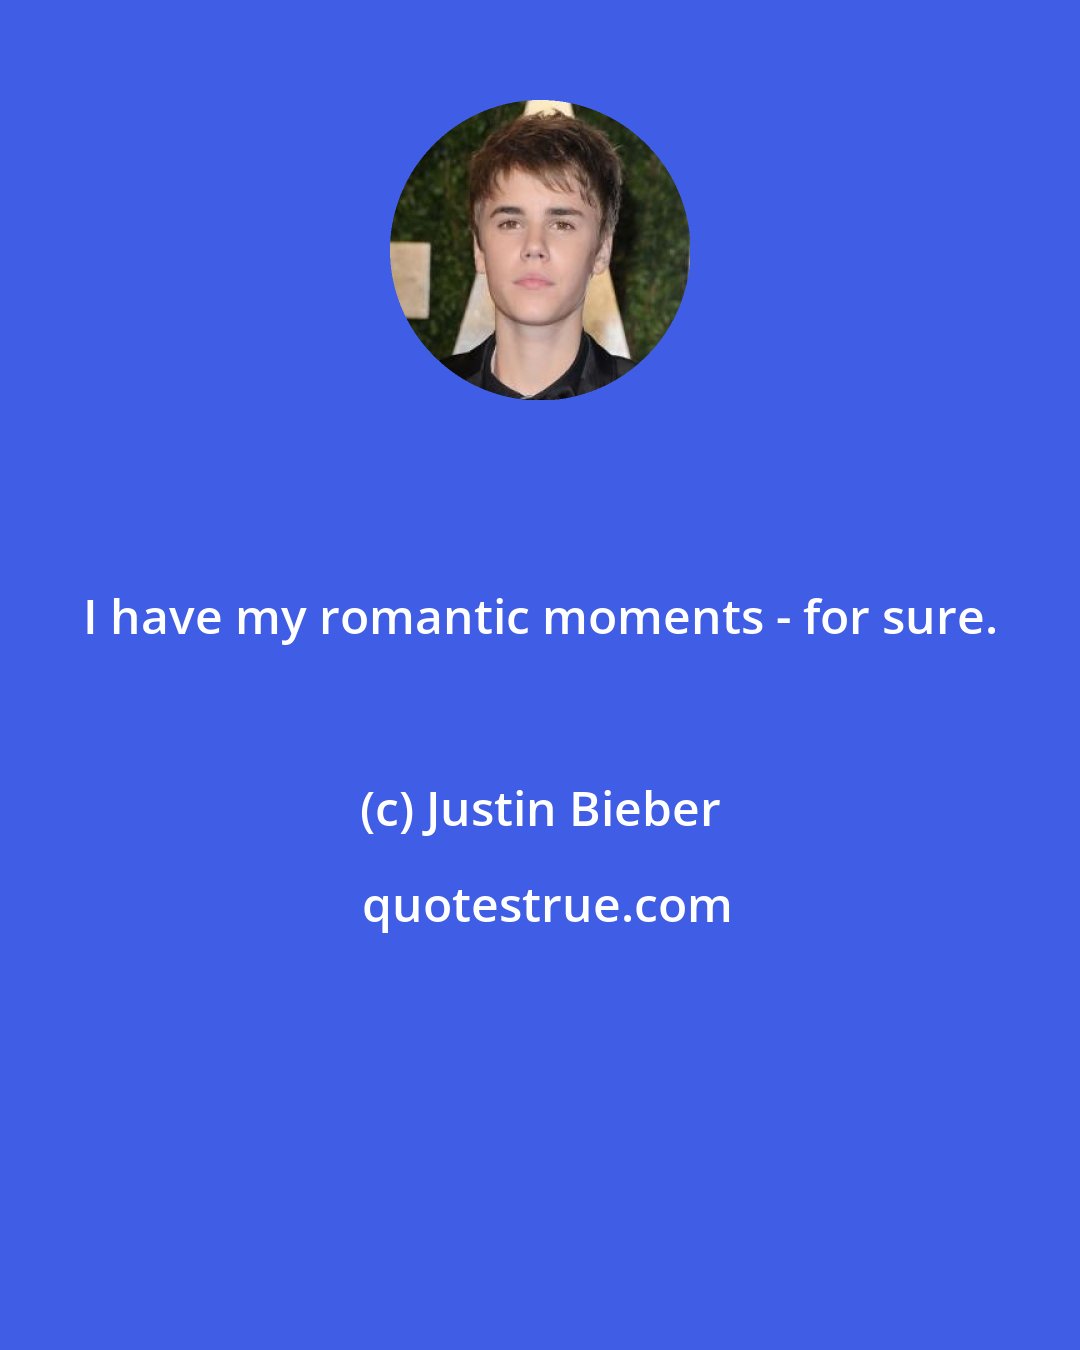 Justin Bieber: I have my romantic moments - for sure.